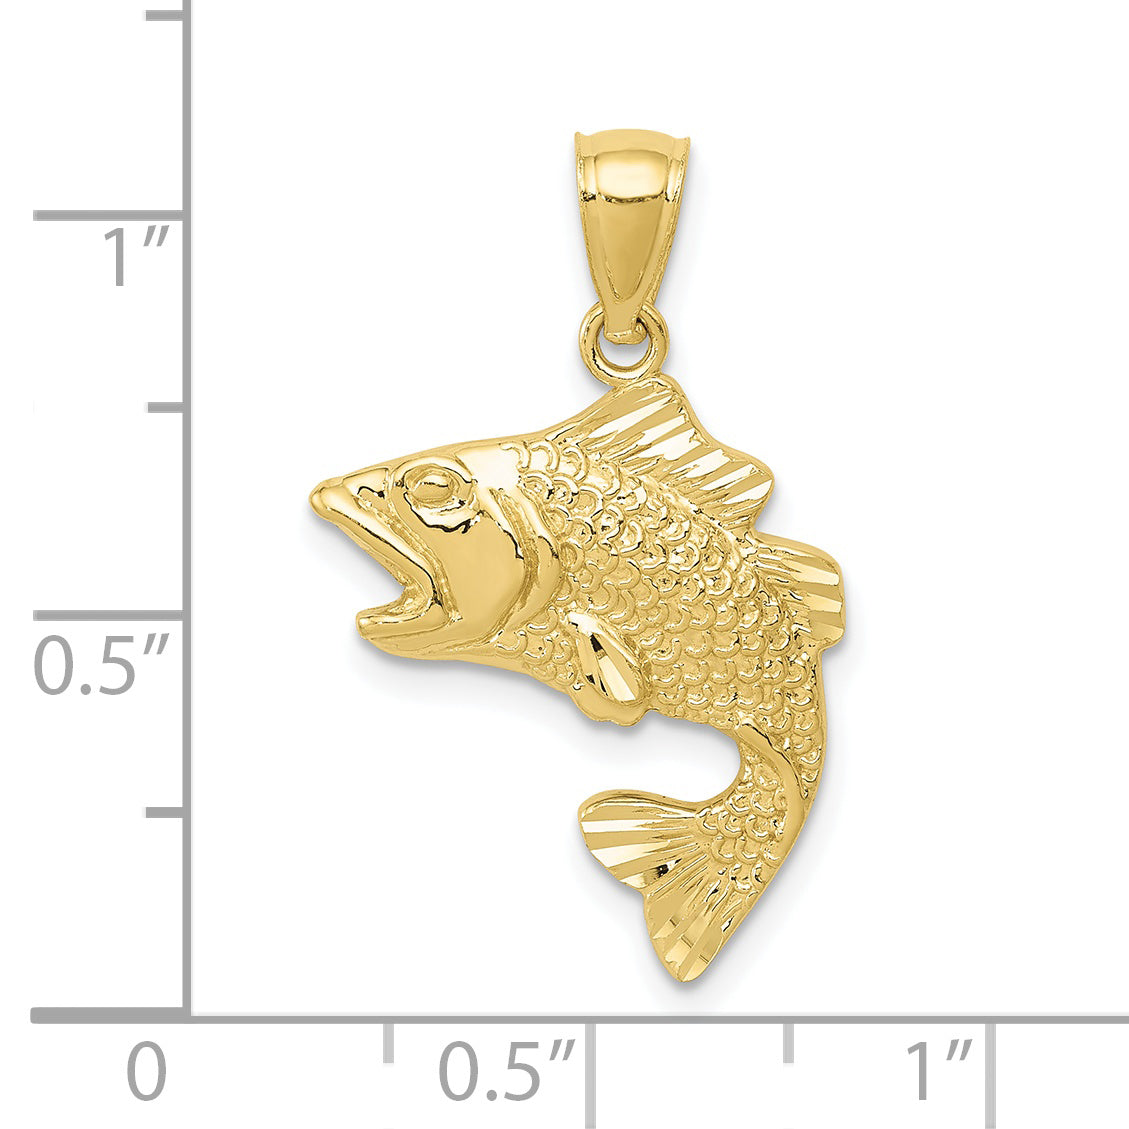 10k Gold Polished & Textured Bass Pendant